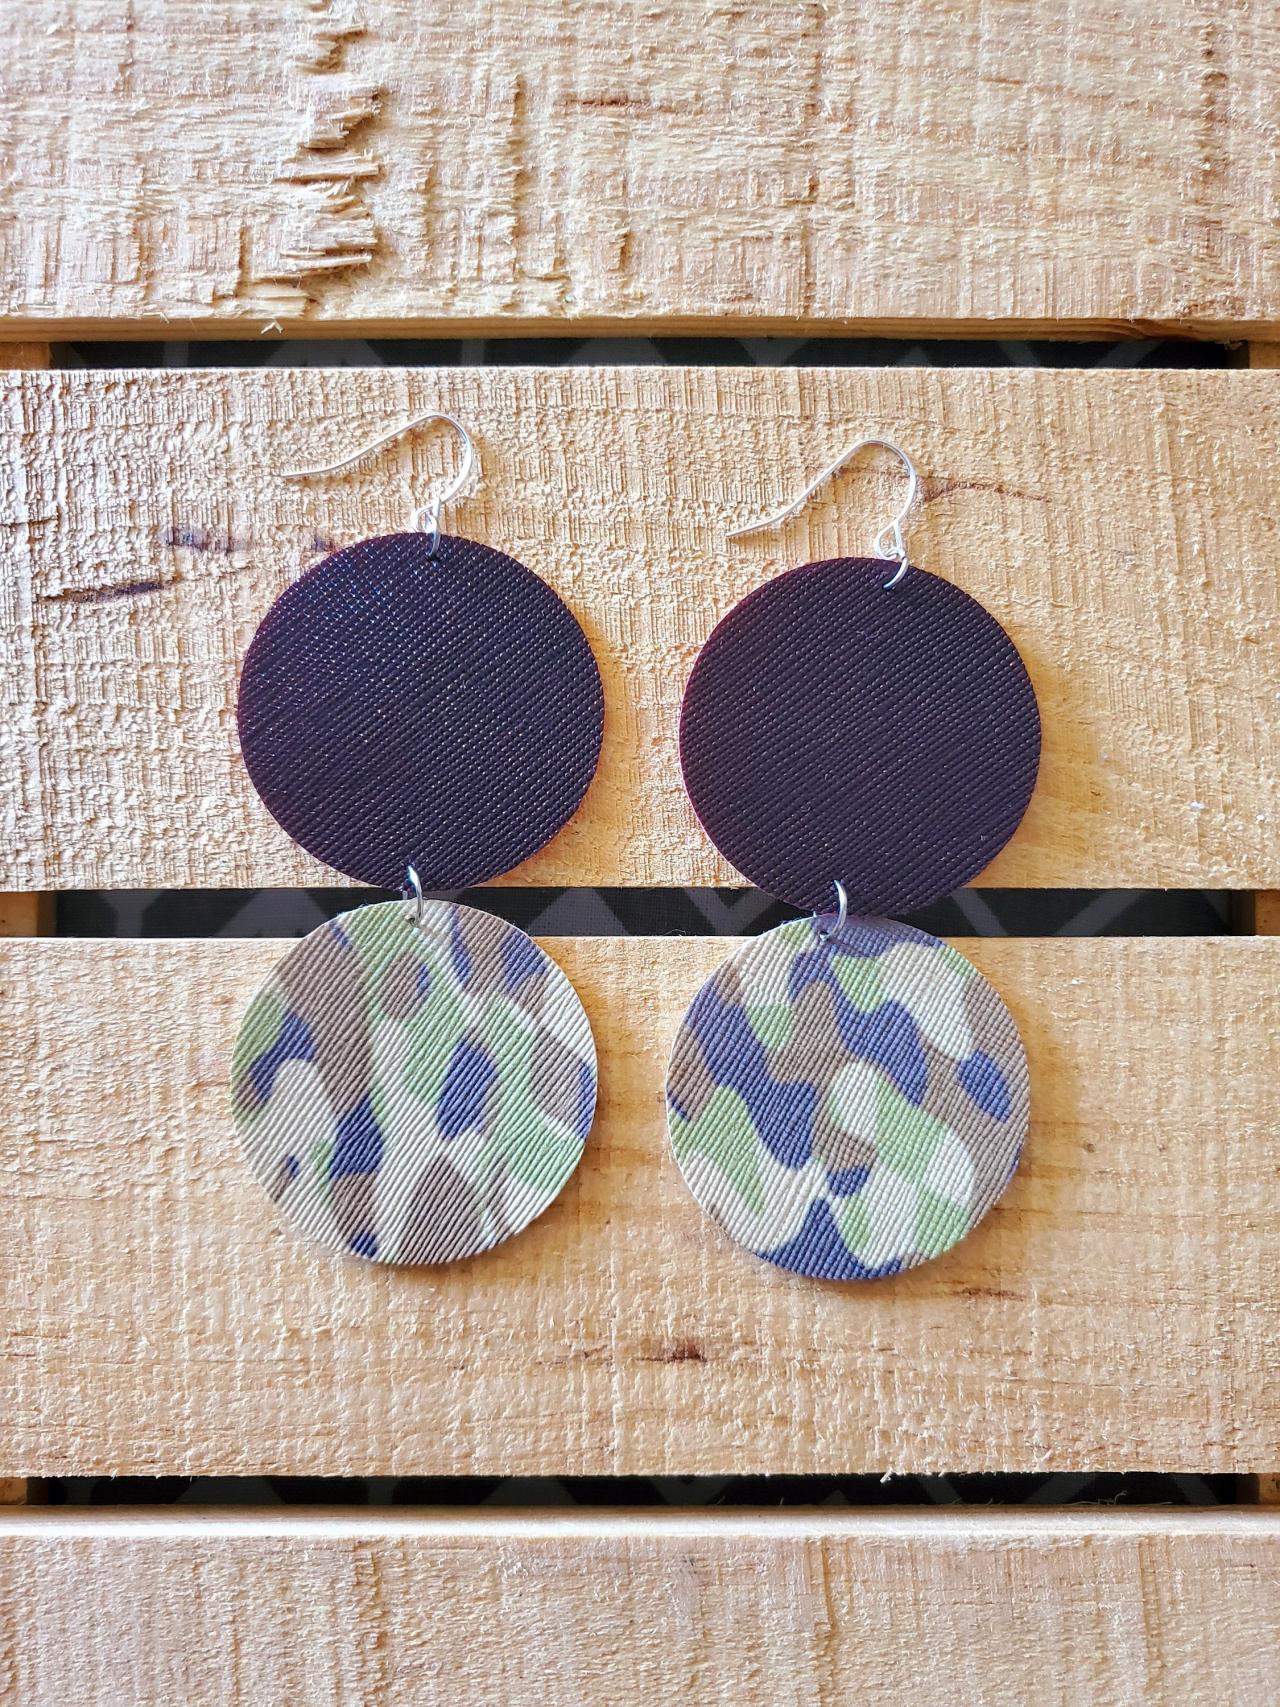 Split Circle Leather Earrings, Camo Faux Leather, Camouflage Leather Earrings, Hinged Earrings, Camo Jewelry, Hunting Earrings, Gift For Her